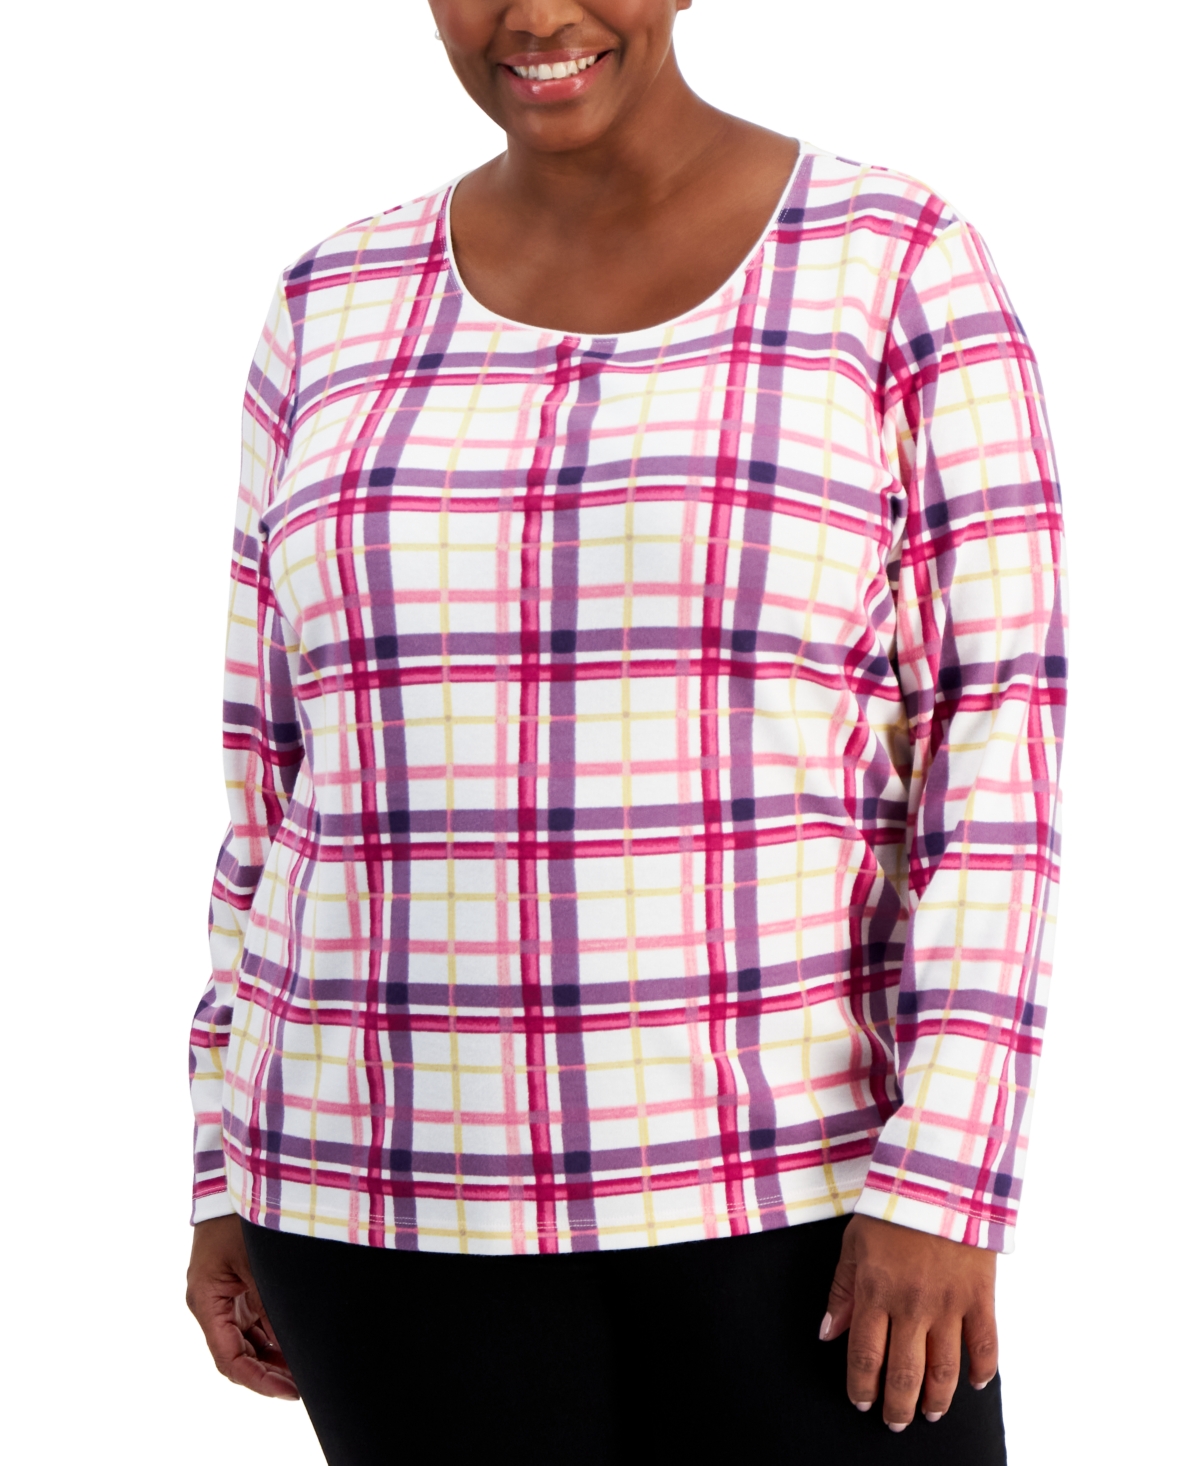 Plus Size Plaid Scoop-Neck Top, Created for Macy's - White/Autumn